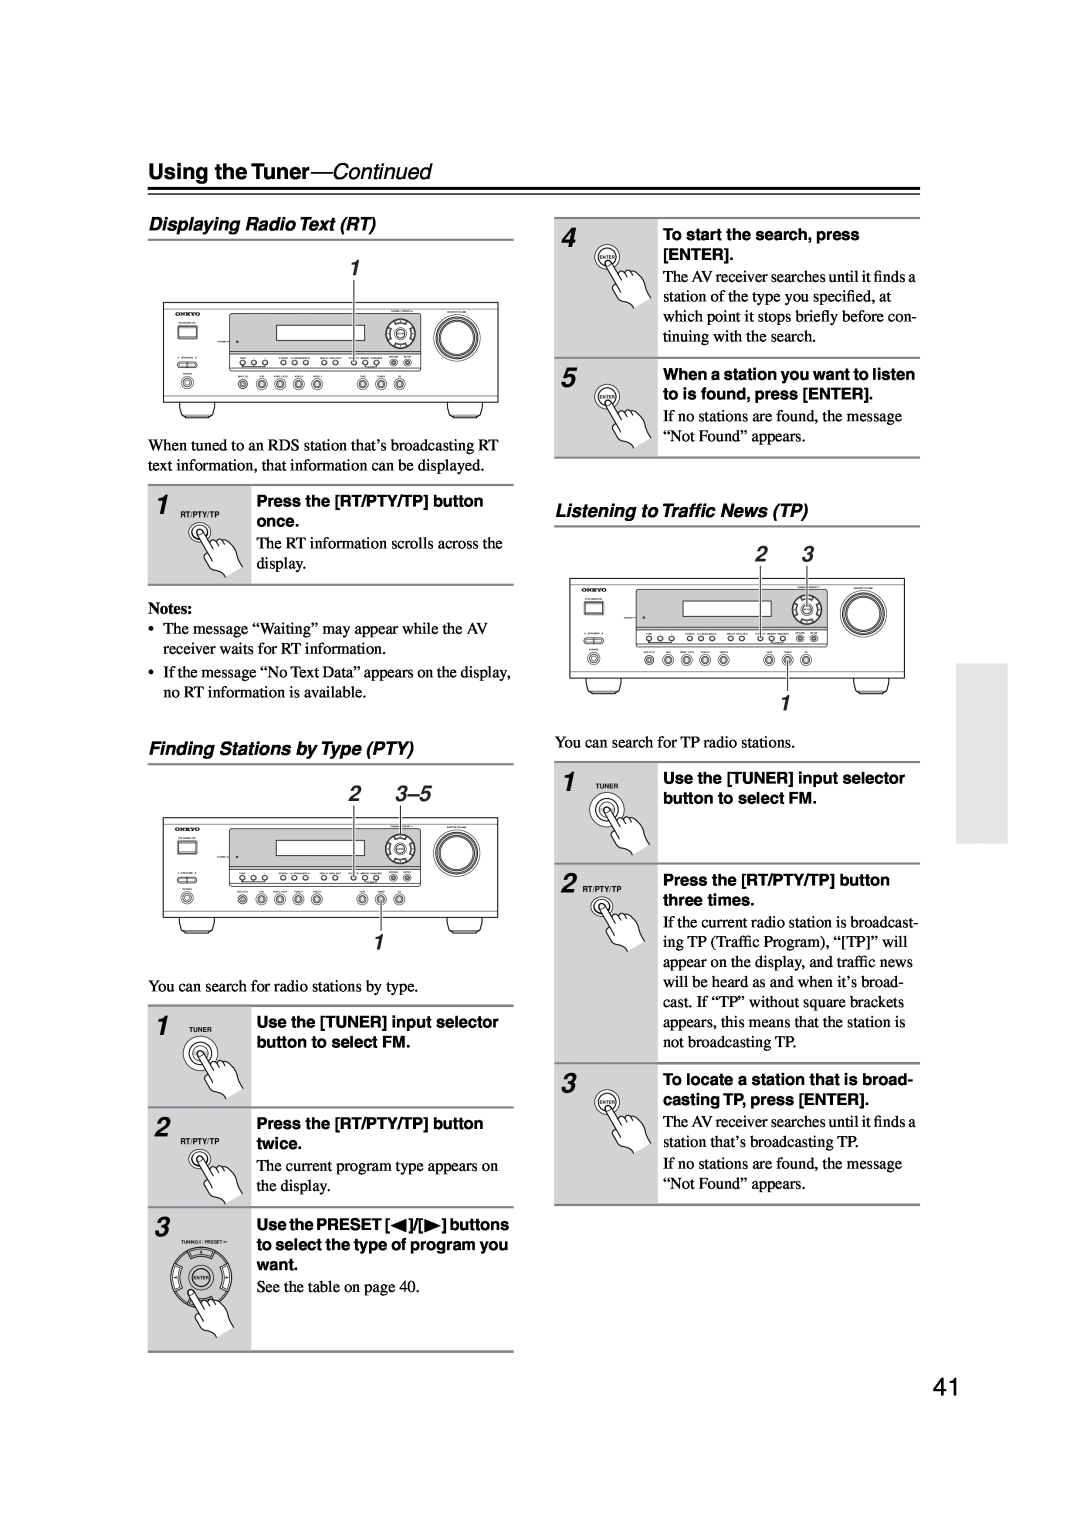 Onkyo HT-S590 instruction manual Displaying Radio Text RT, Finding Stations by Type PTY, Listening to Trafﬁc News TP 